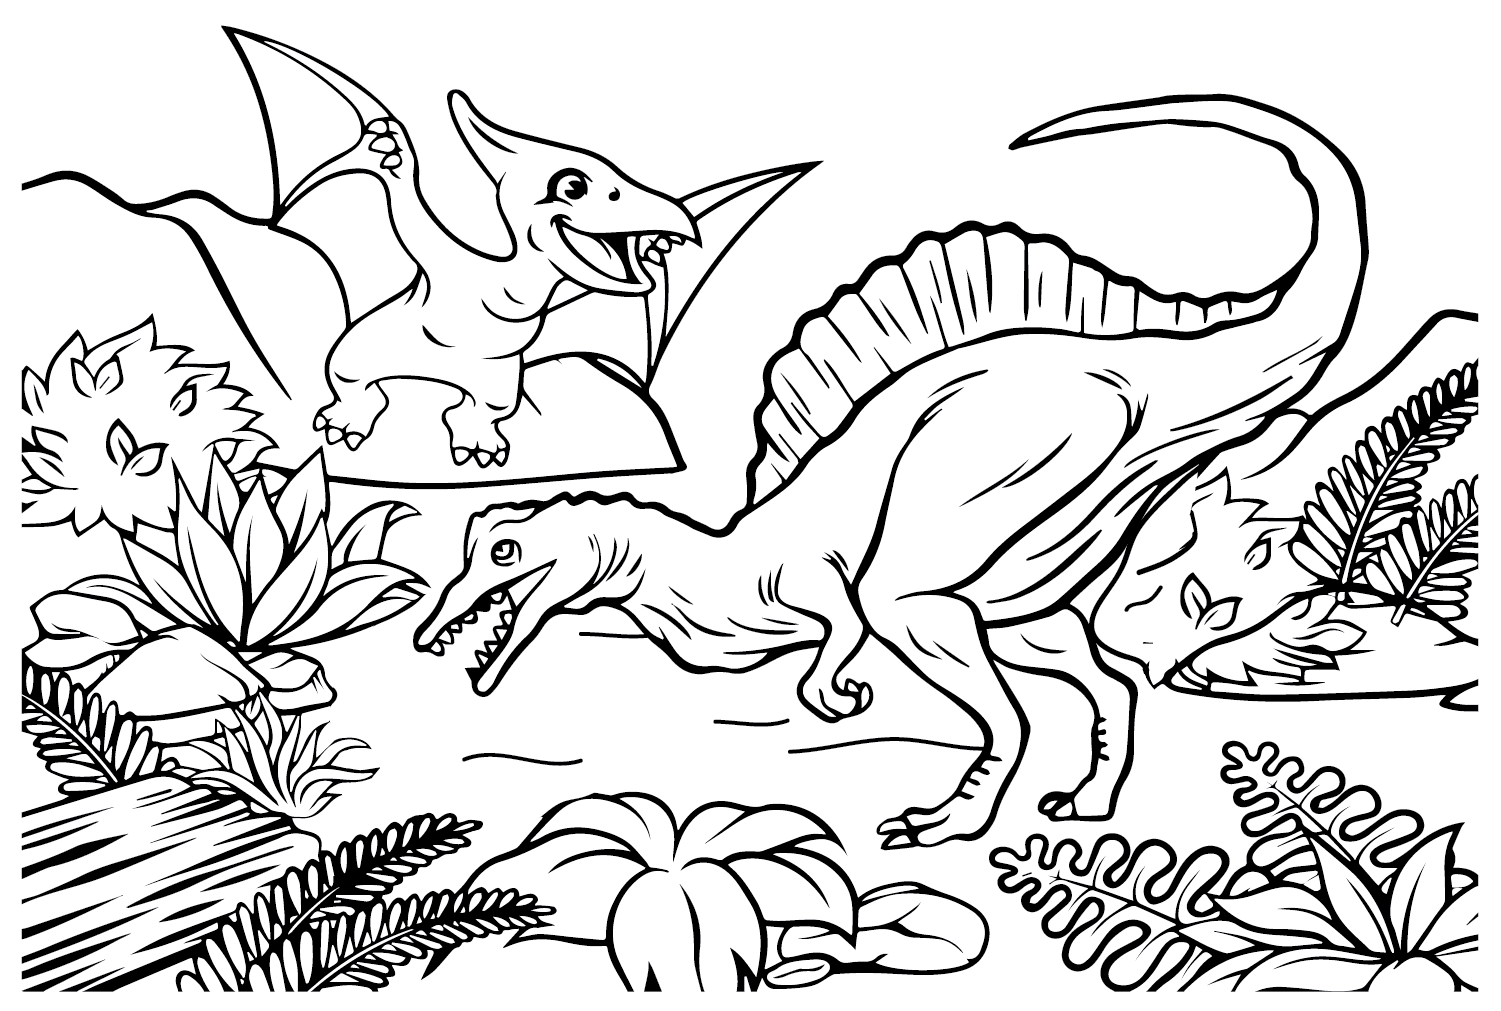 Images Spinosaurus Aegyptiacus to Color from Spinosaurus Aegyptiacus